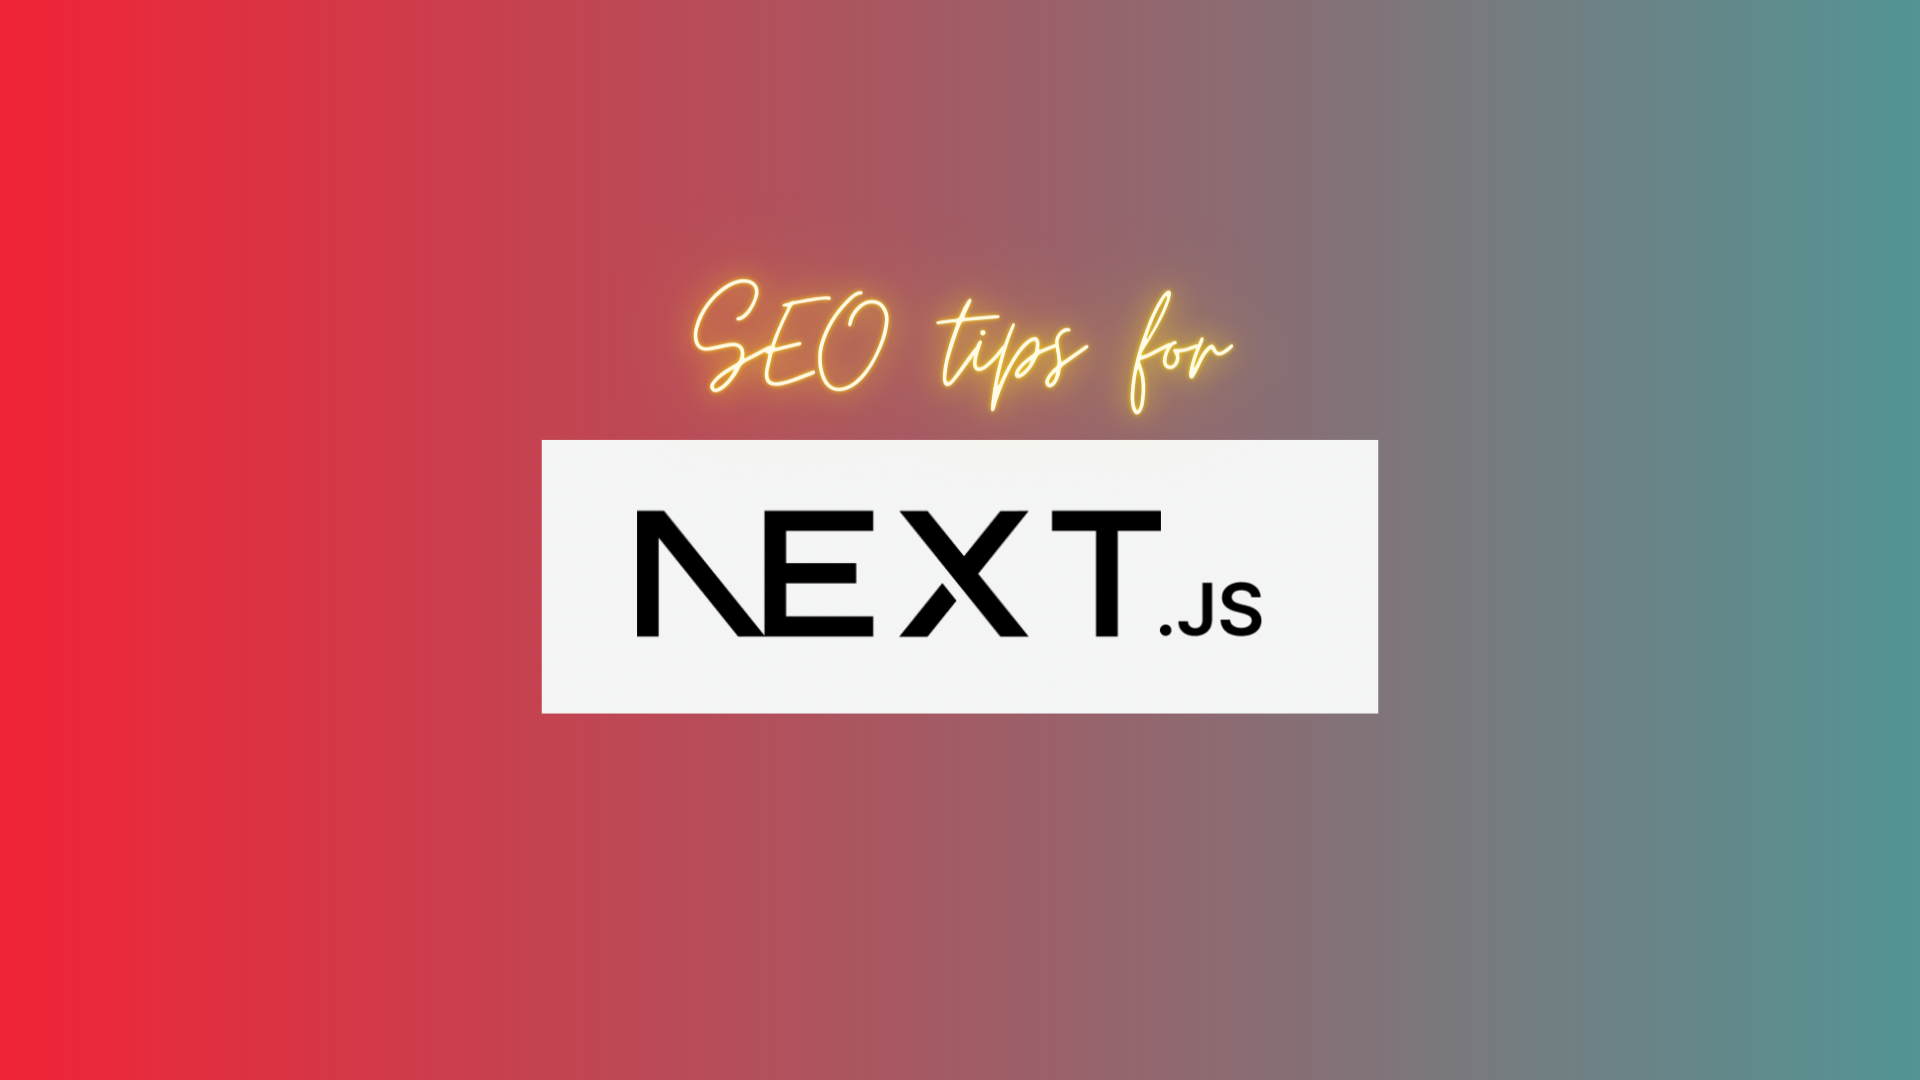 SEO tips for Next.js with logo on a blended red and blue background.